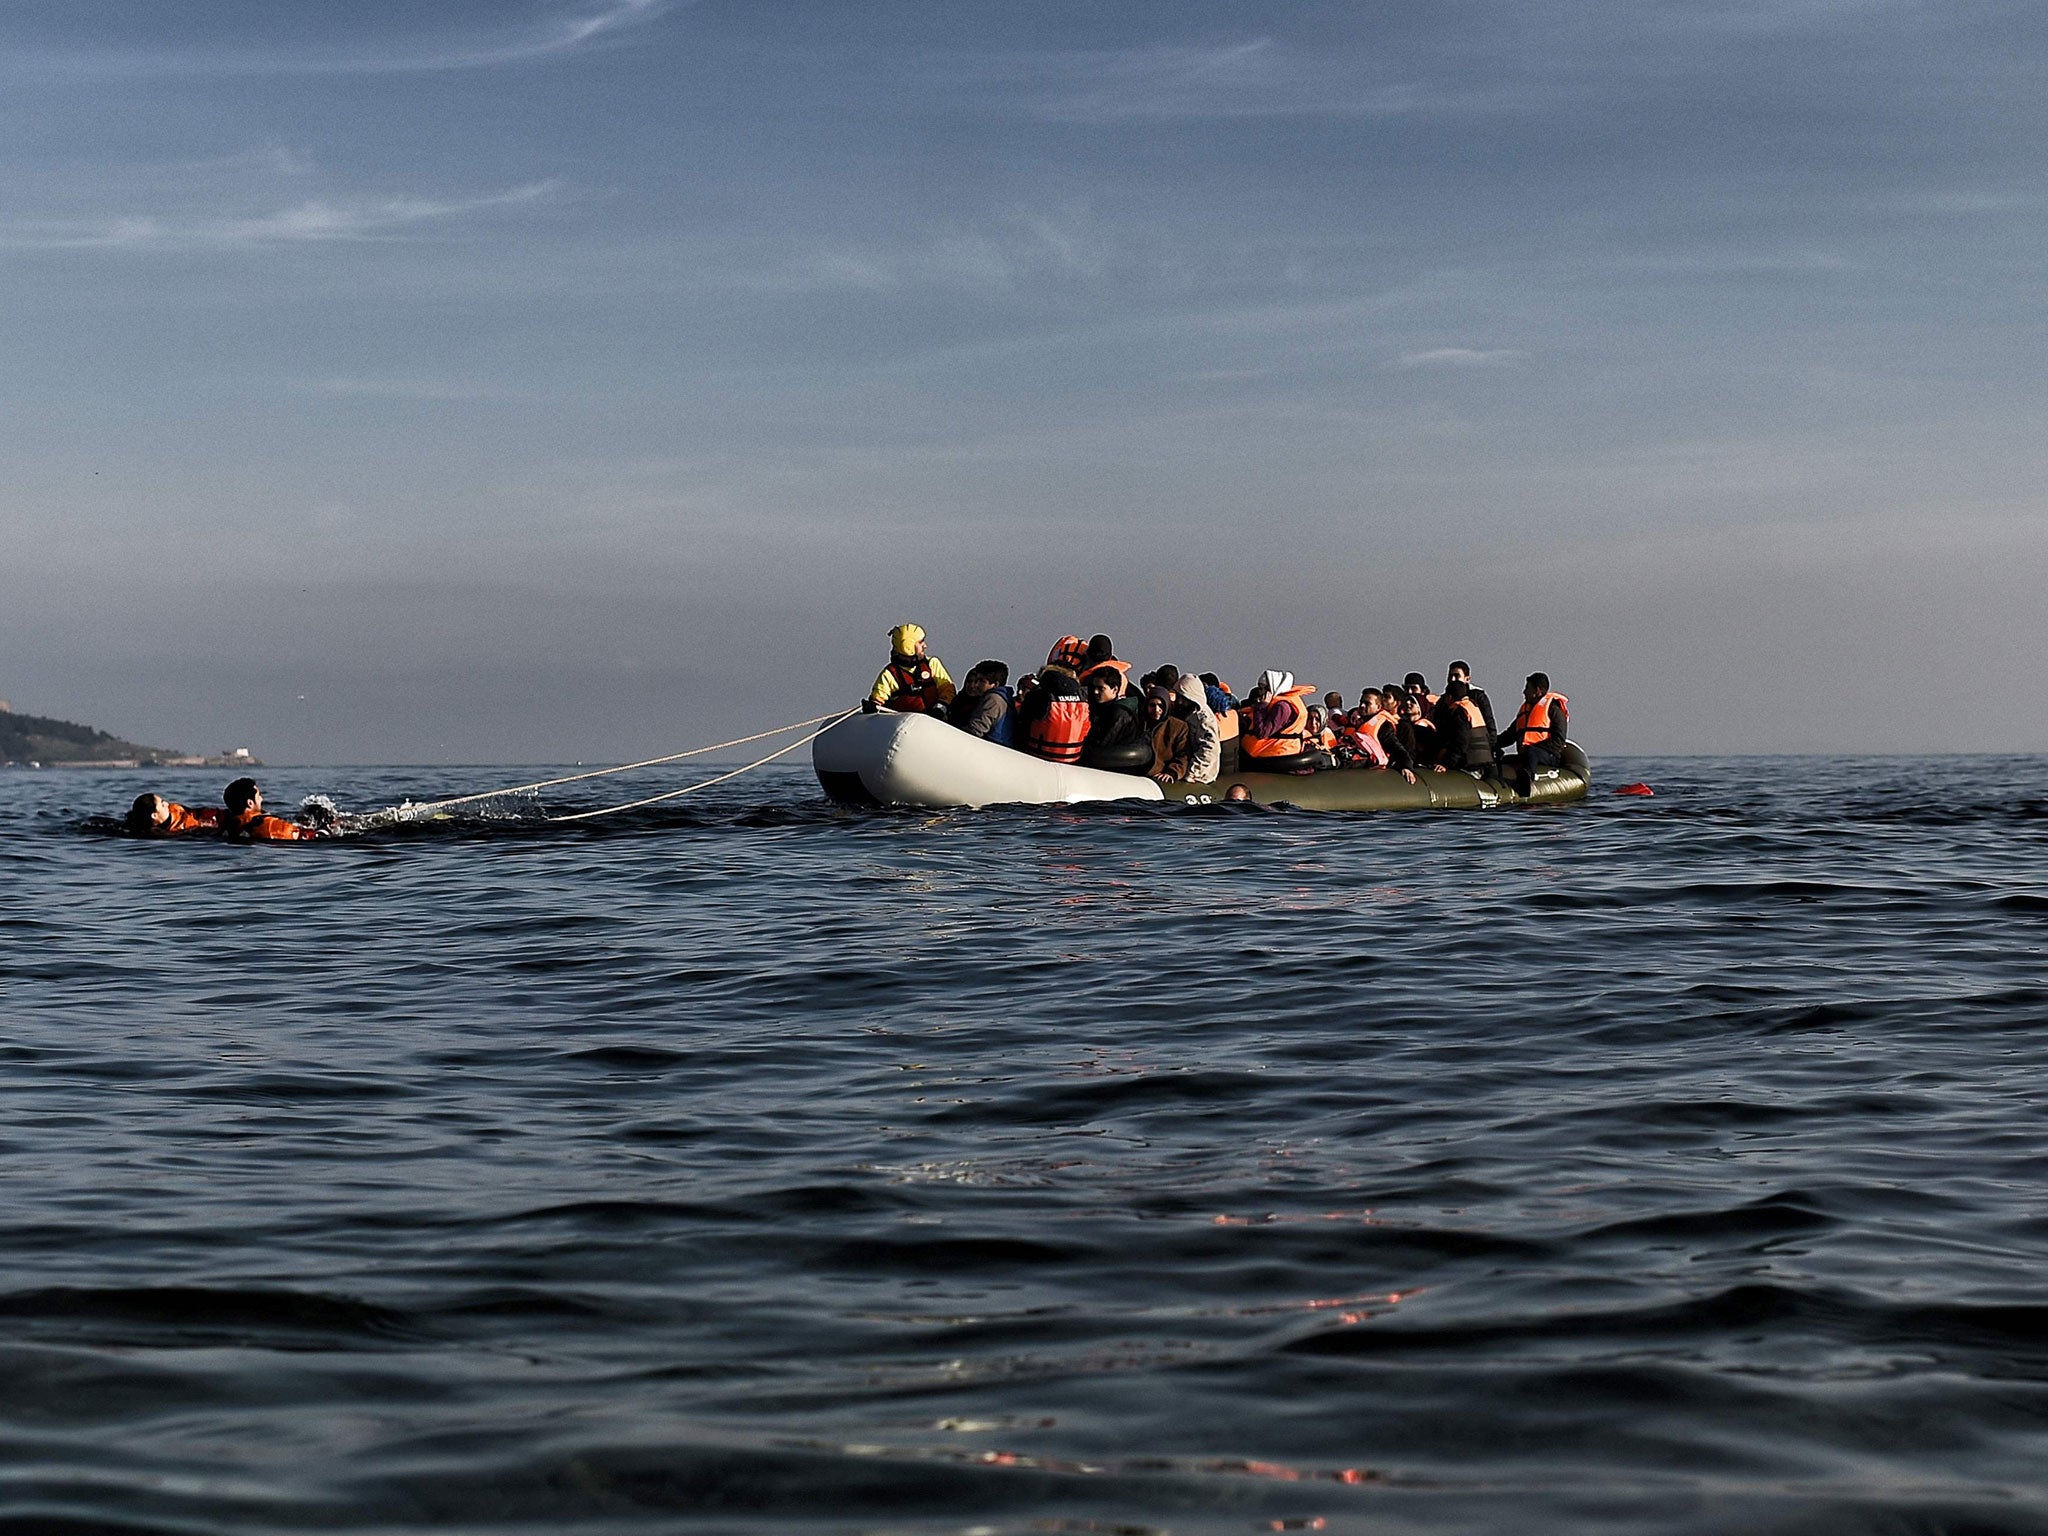 Migrants arrive on a rubber boat in Mytilene, on the Greek island of Lesbos, after crossing the Aegean sea from Turkey